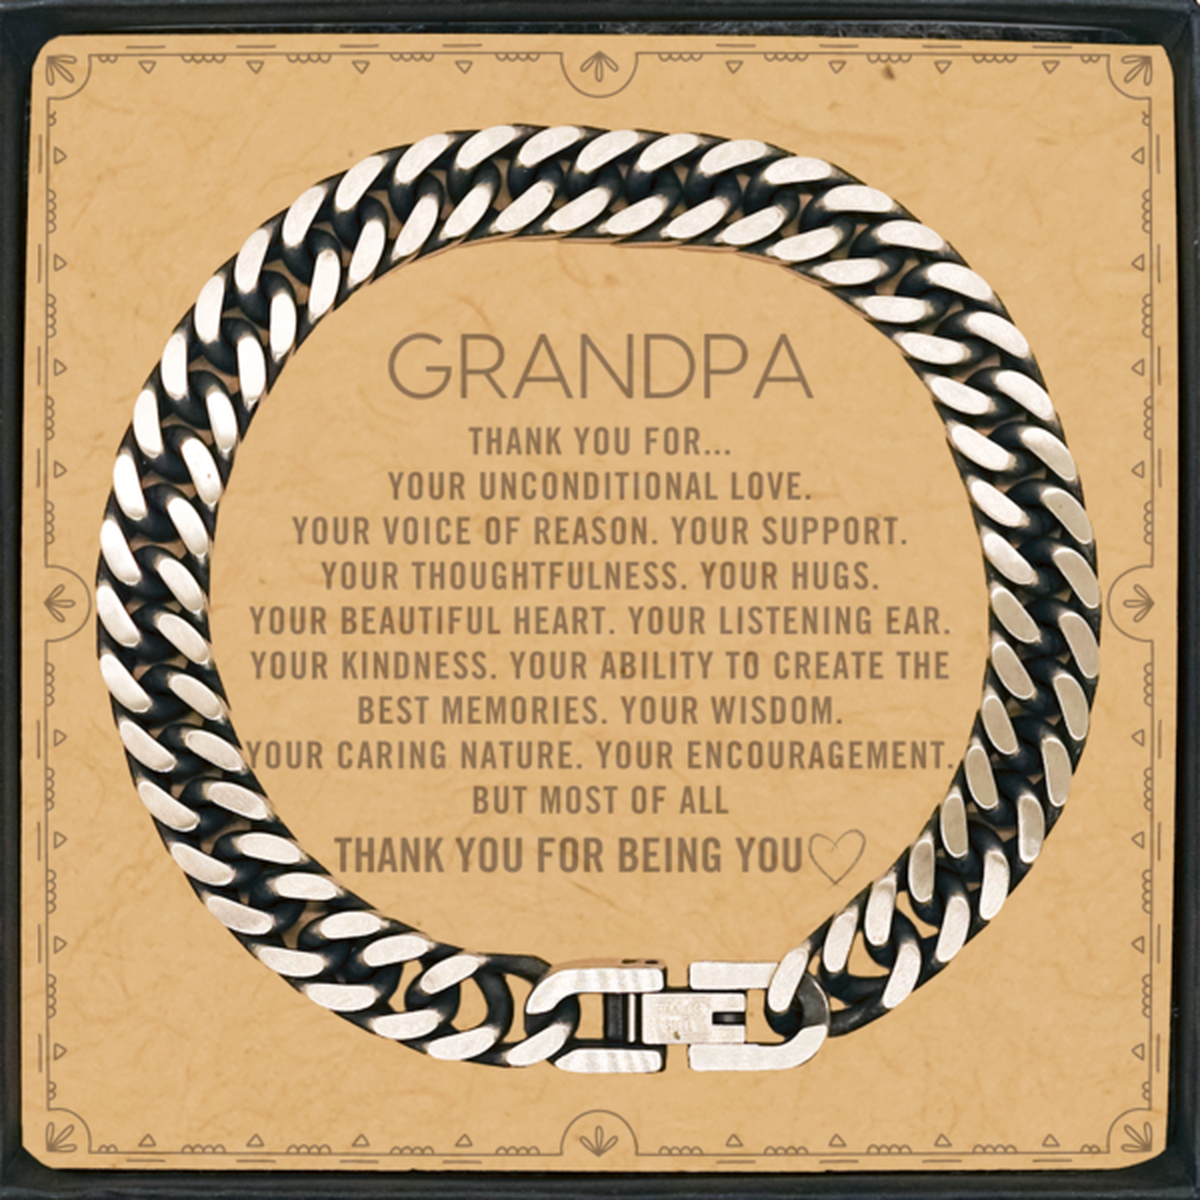 Grandpa Cuban Link Chain Bracelet Custom, Message Card Gifts For Grandpa Christmas Graduation Birthday Gifts for Men Women Grandpa Thank you for Your unconditional love